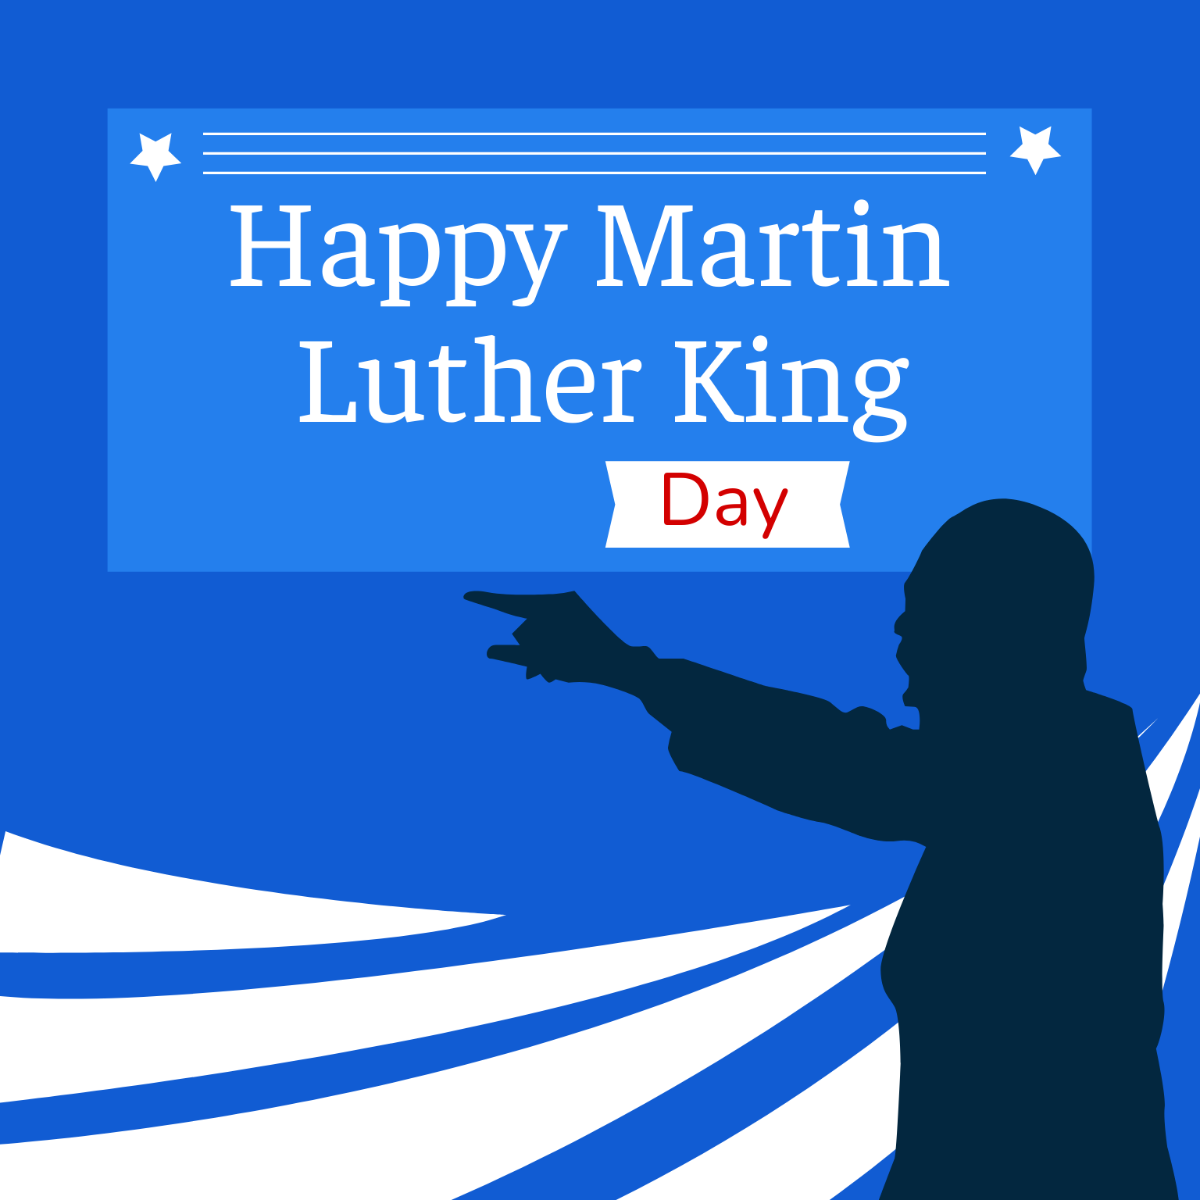 Martin Luther King Day Celebration Vector Template